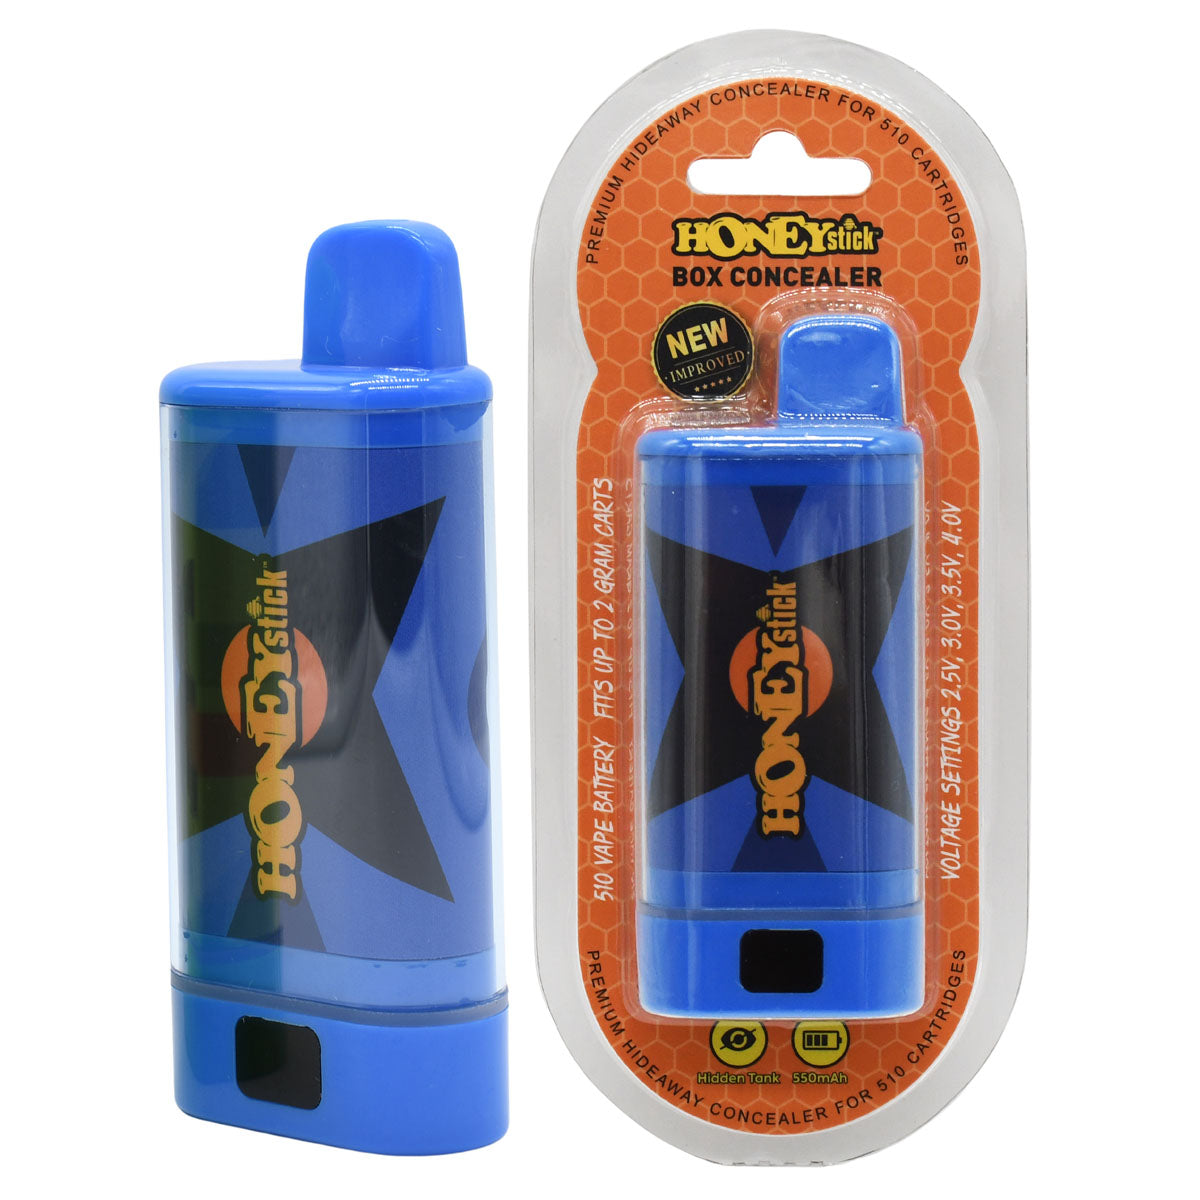 Blue Box Cartridge Vape Concealer - Front and shown in original packaging 